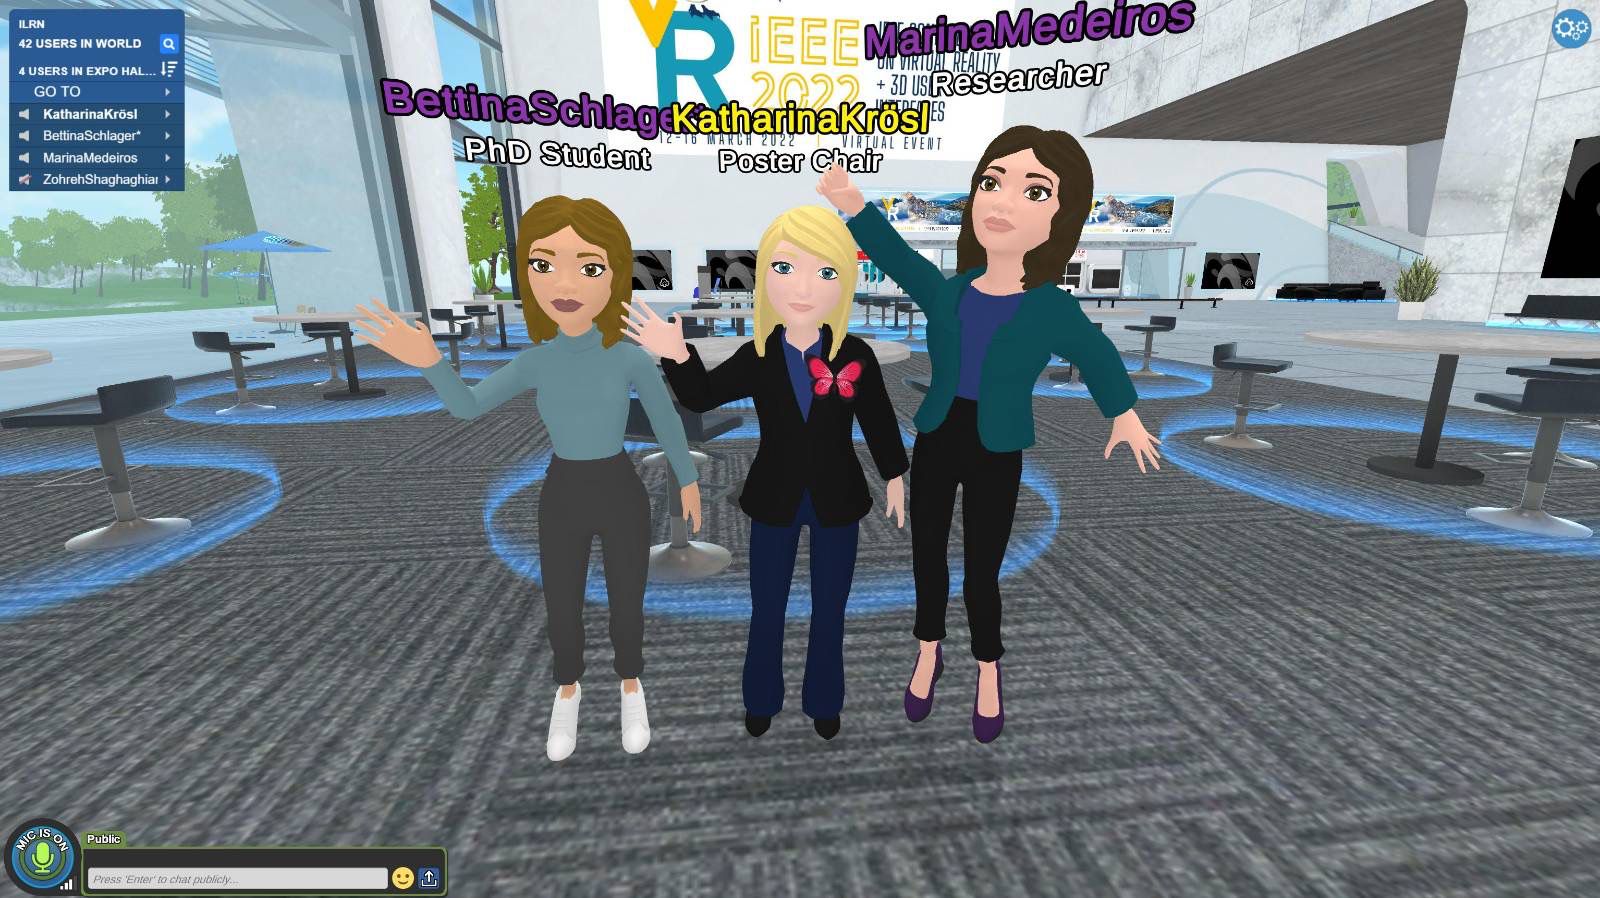 Screenshot from Virbela: The avatars of three female researchers are waving with their hands.